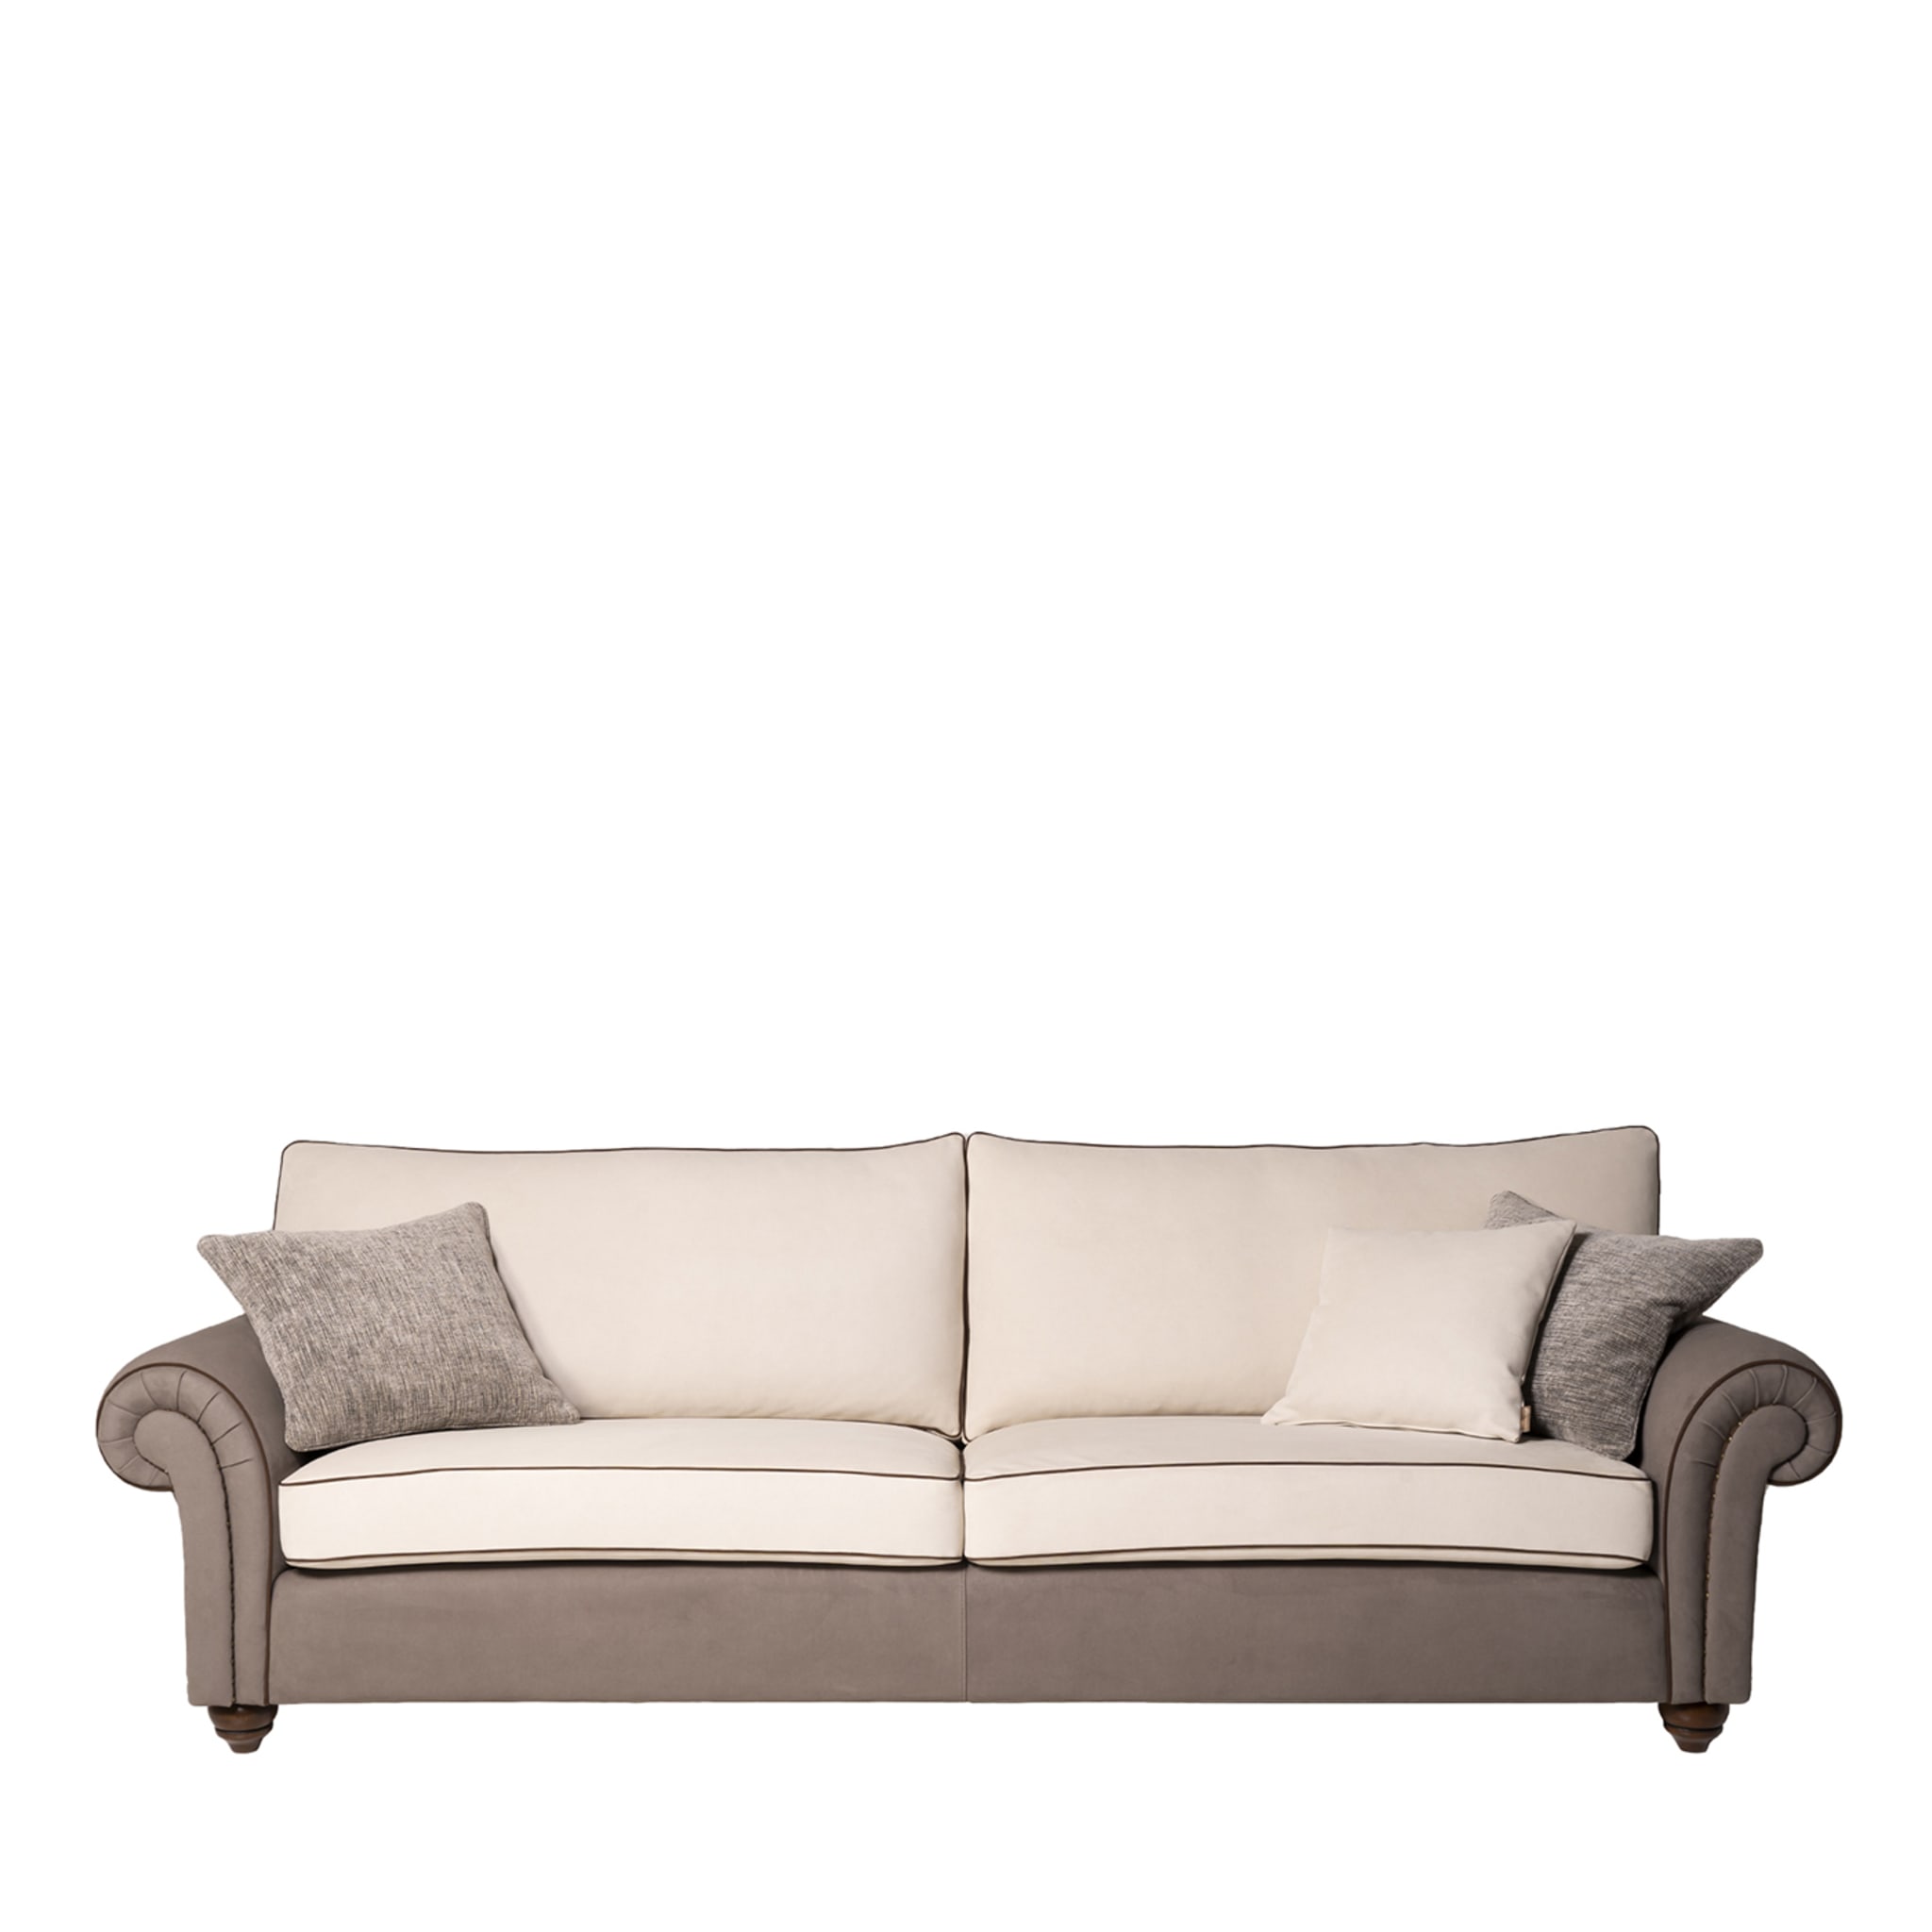 Borghese 3-Seater Sofa by Marco and Giulio Mantellassi - Main view